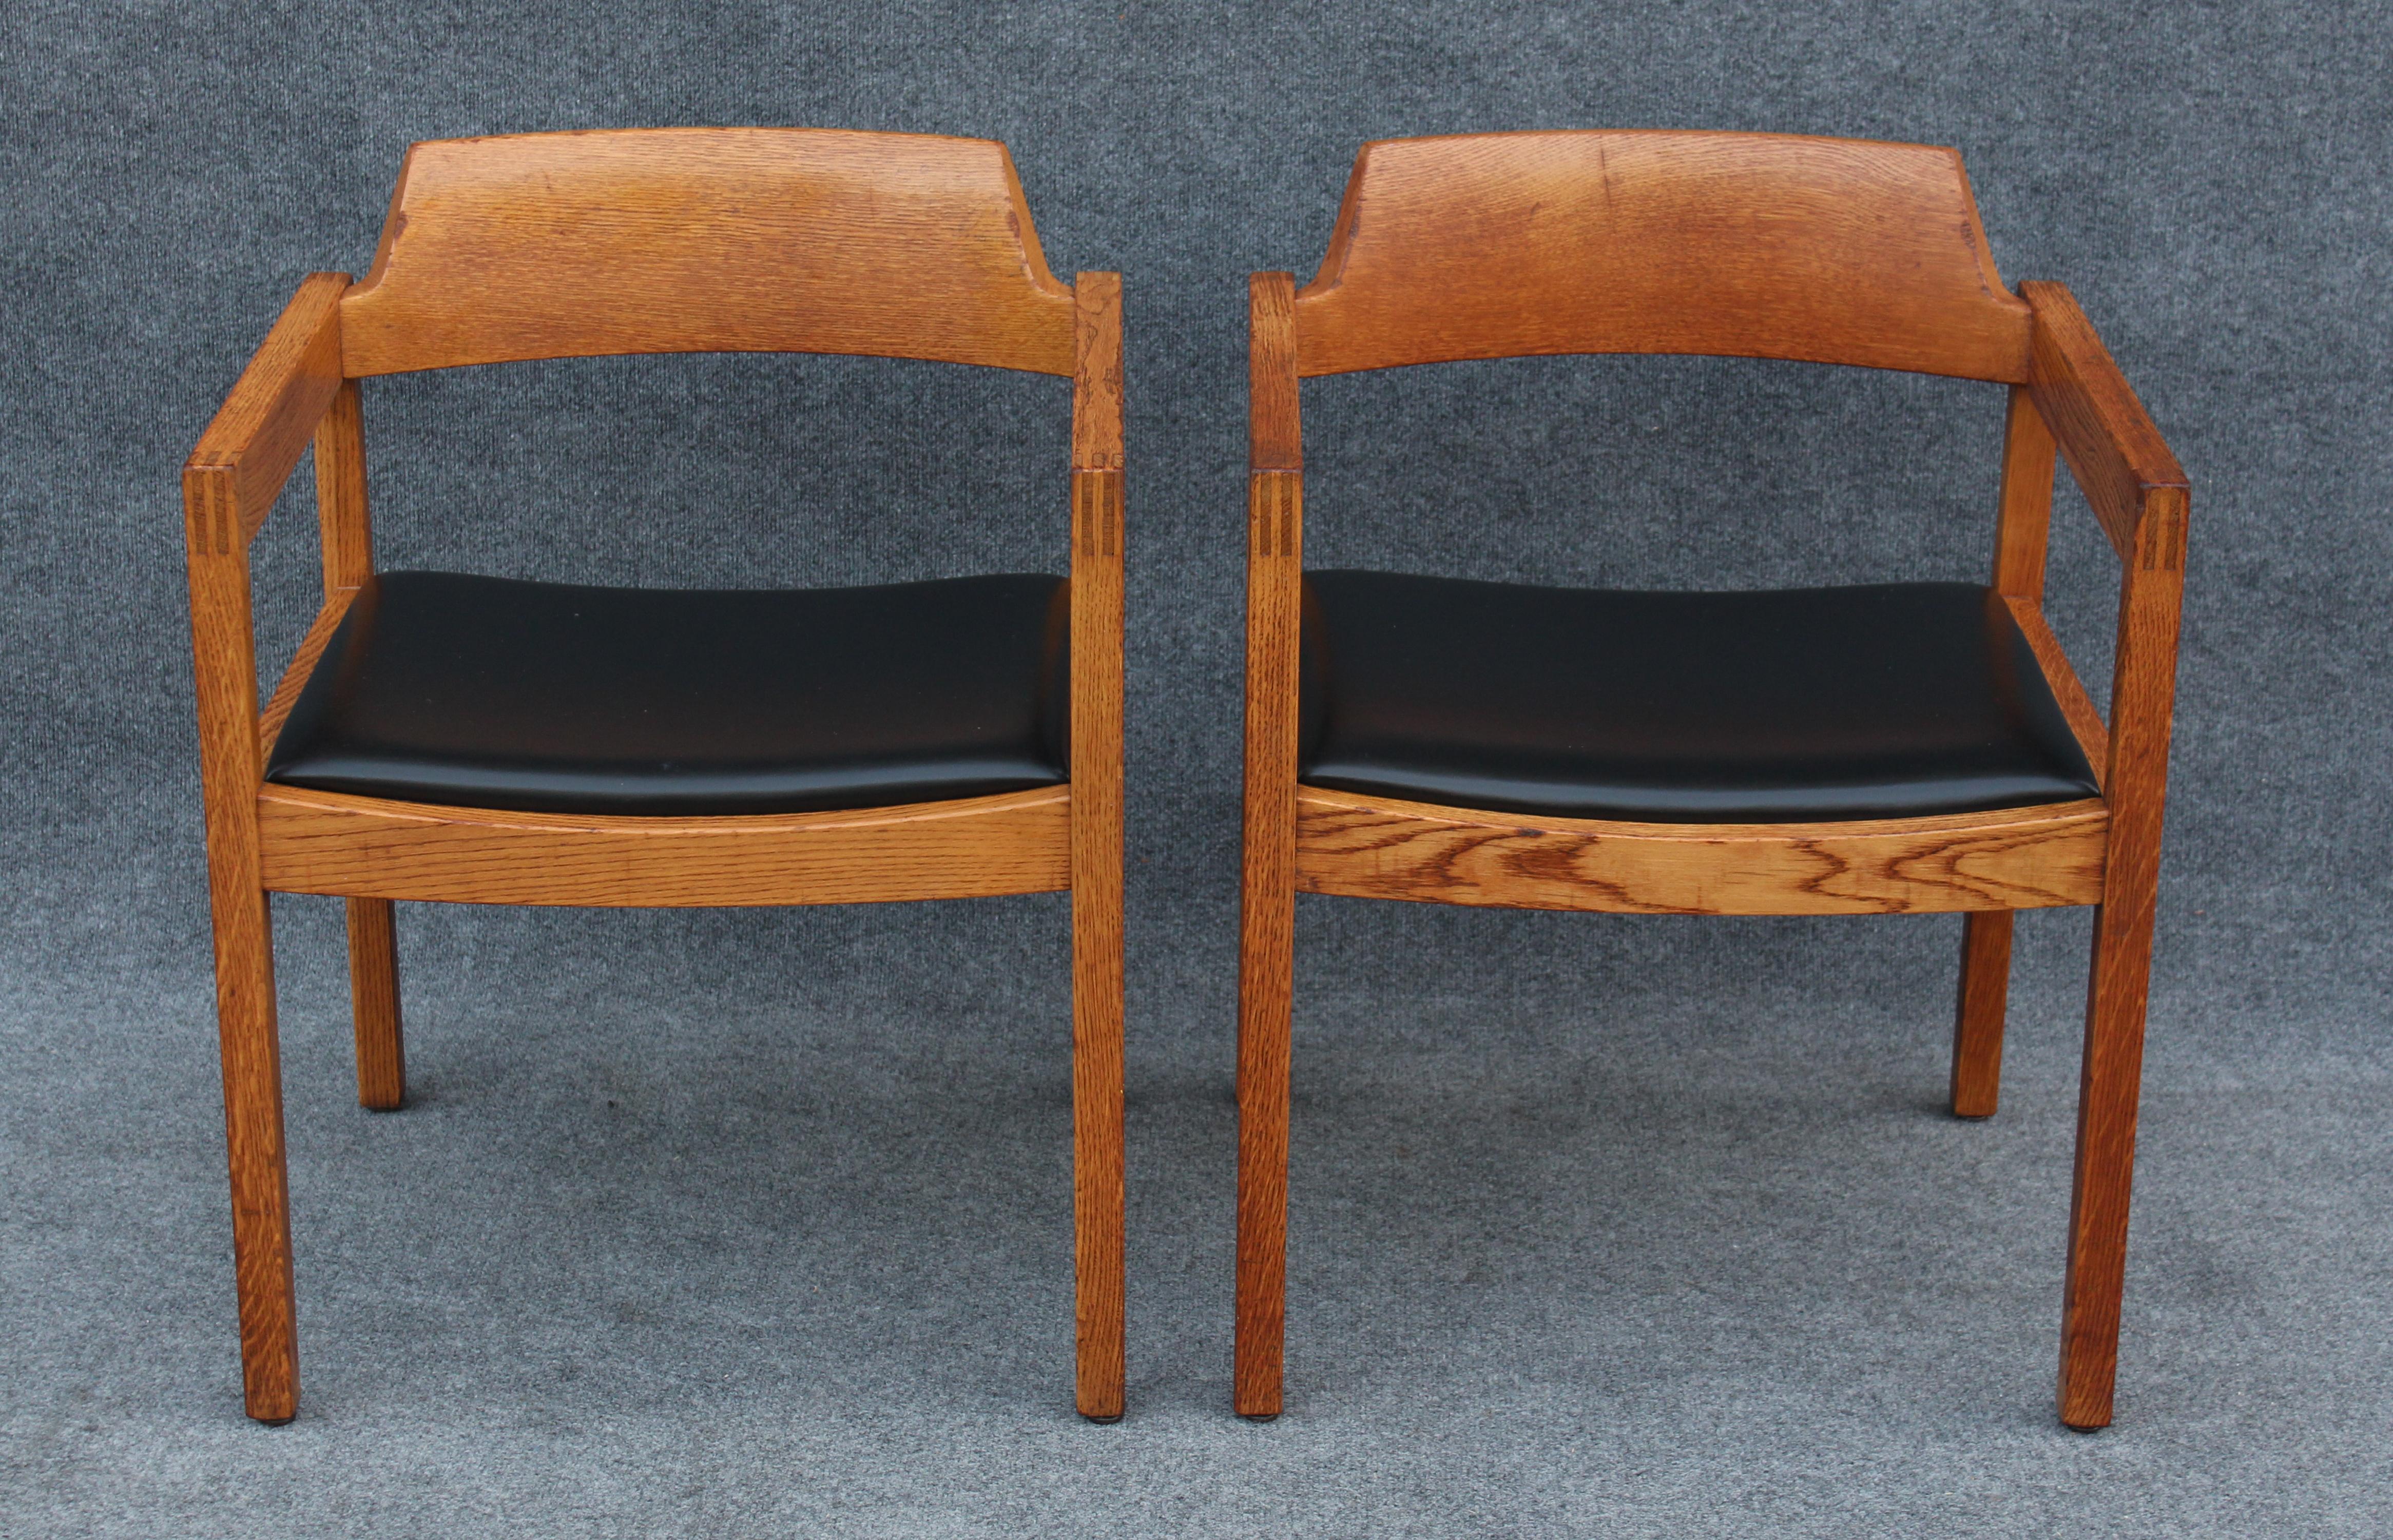 Designed and made in the 1970s by American manufacturer Gunlocke, this rare set of chairs features very high quality construction and materials. Made of solid oak, the wood for these chairs was cut in an unconventional manner. Instead of cutting